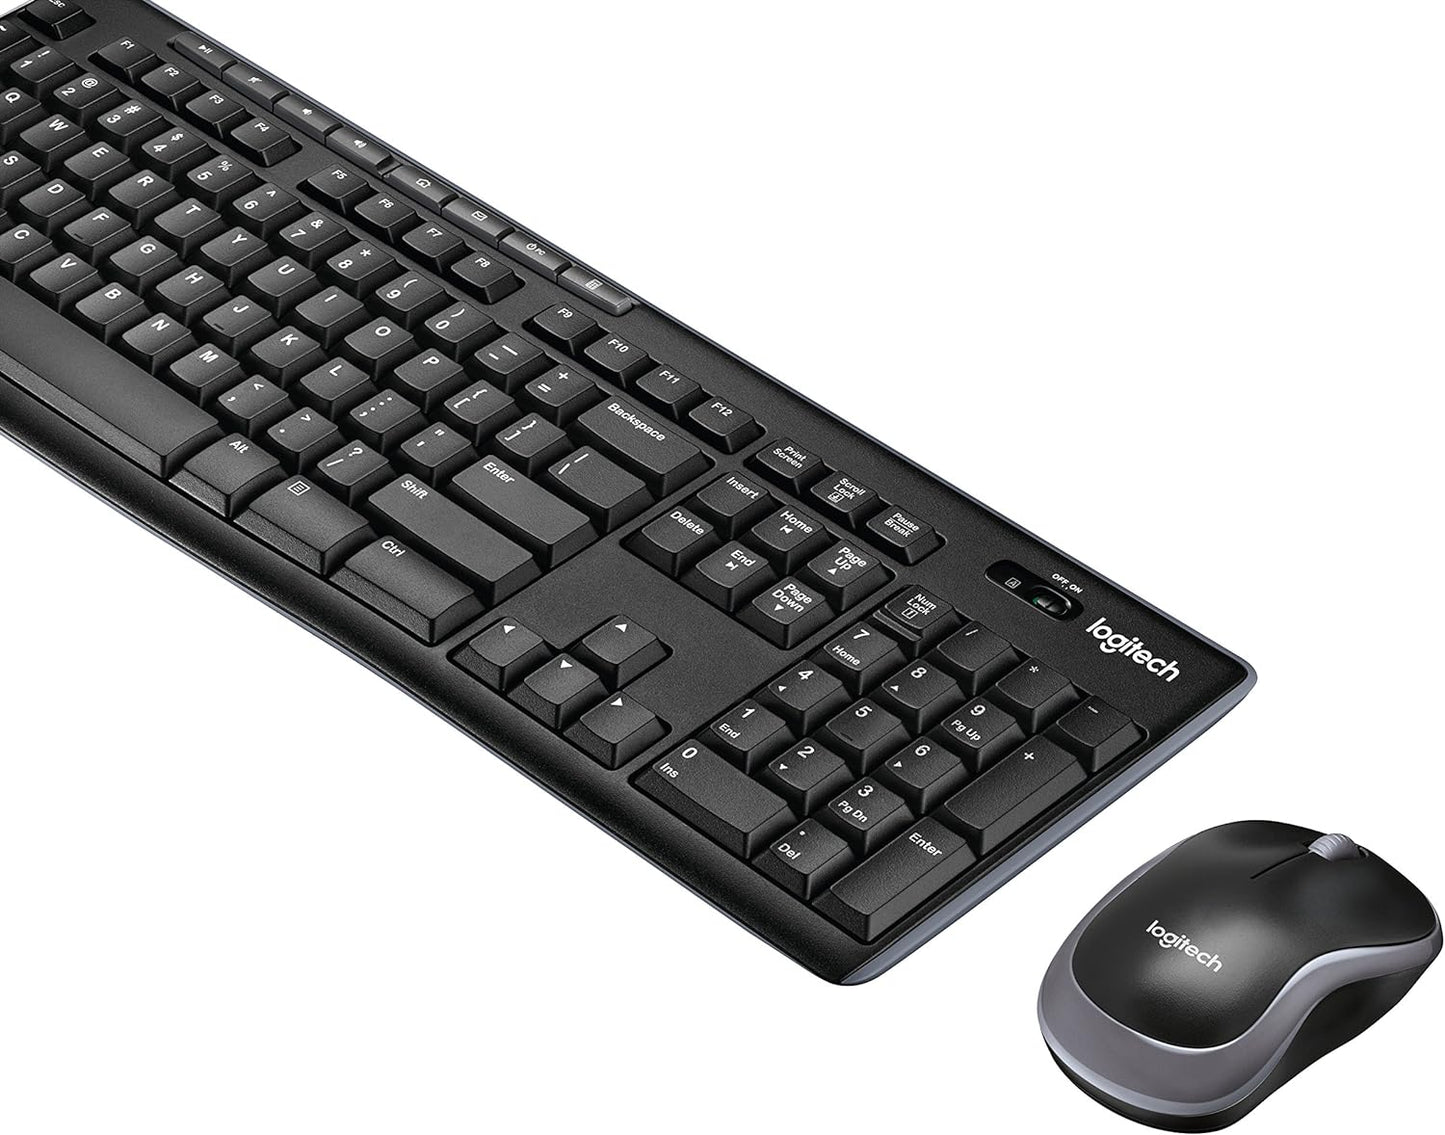 "Enhance Your Workstation with MK270 Wireless Keyboard and Mouse Combo - Long Battery Life, Compact Design, and Convenient Multimedia Keys - Perfect for PC and Laptop Users!"